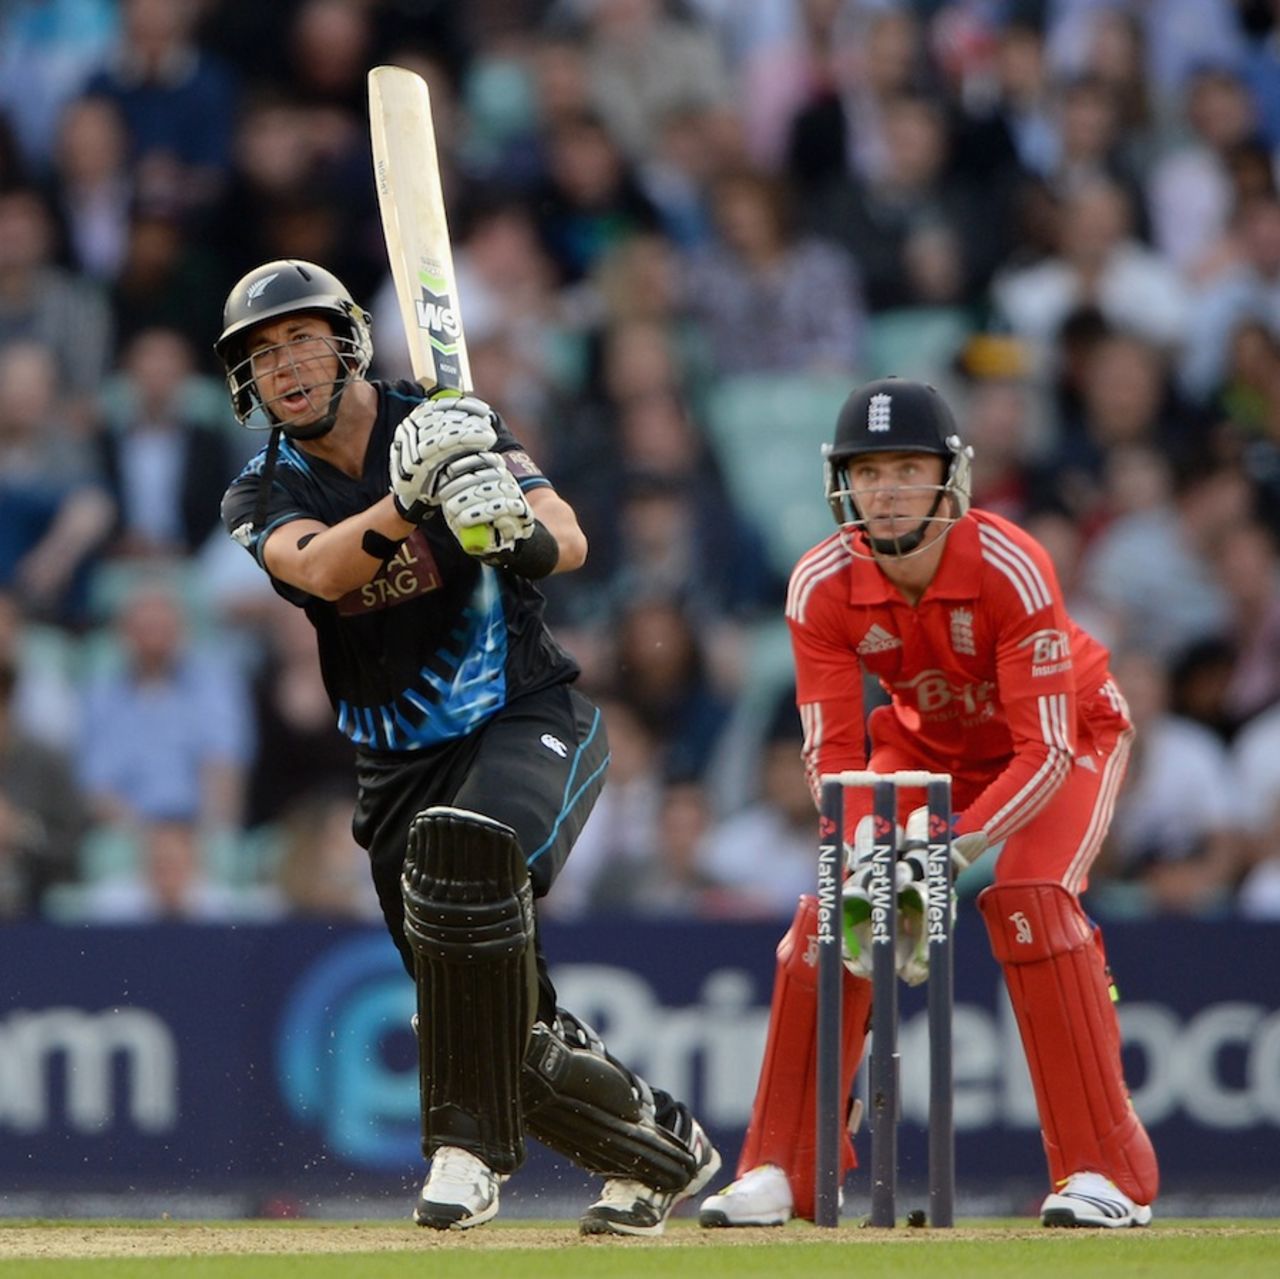 Ross Taylor hits one back, England v New Zealand, 1st T20, The Oval, June 25, 2013